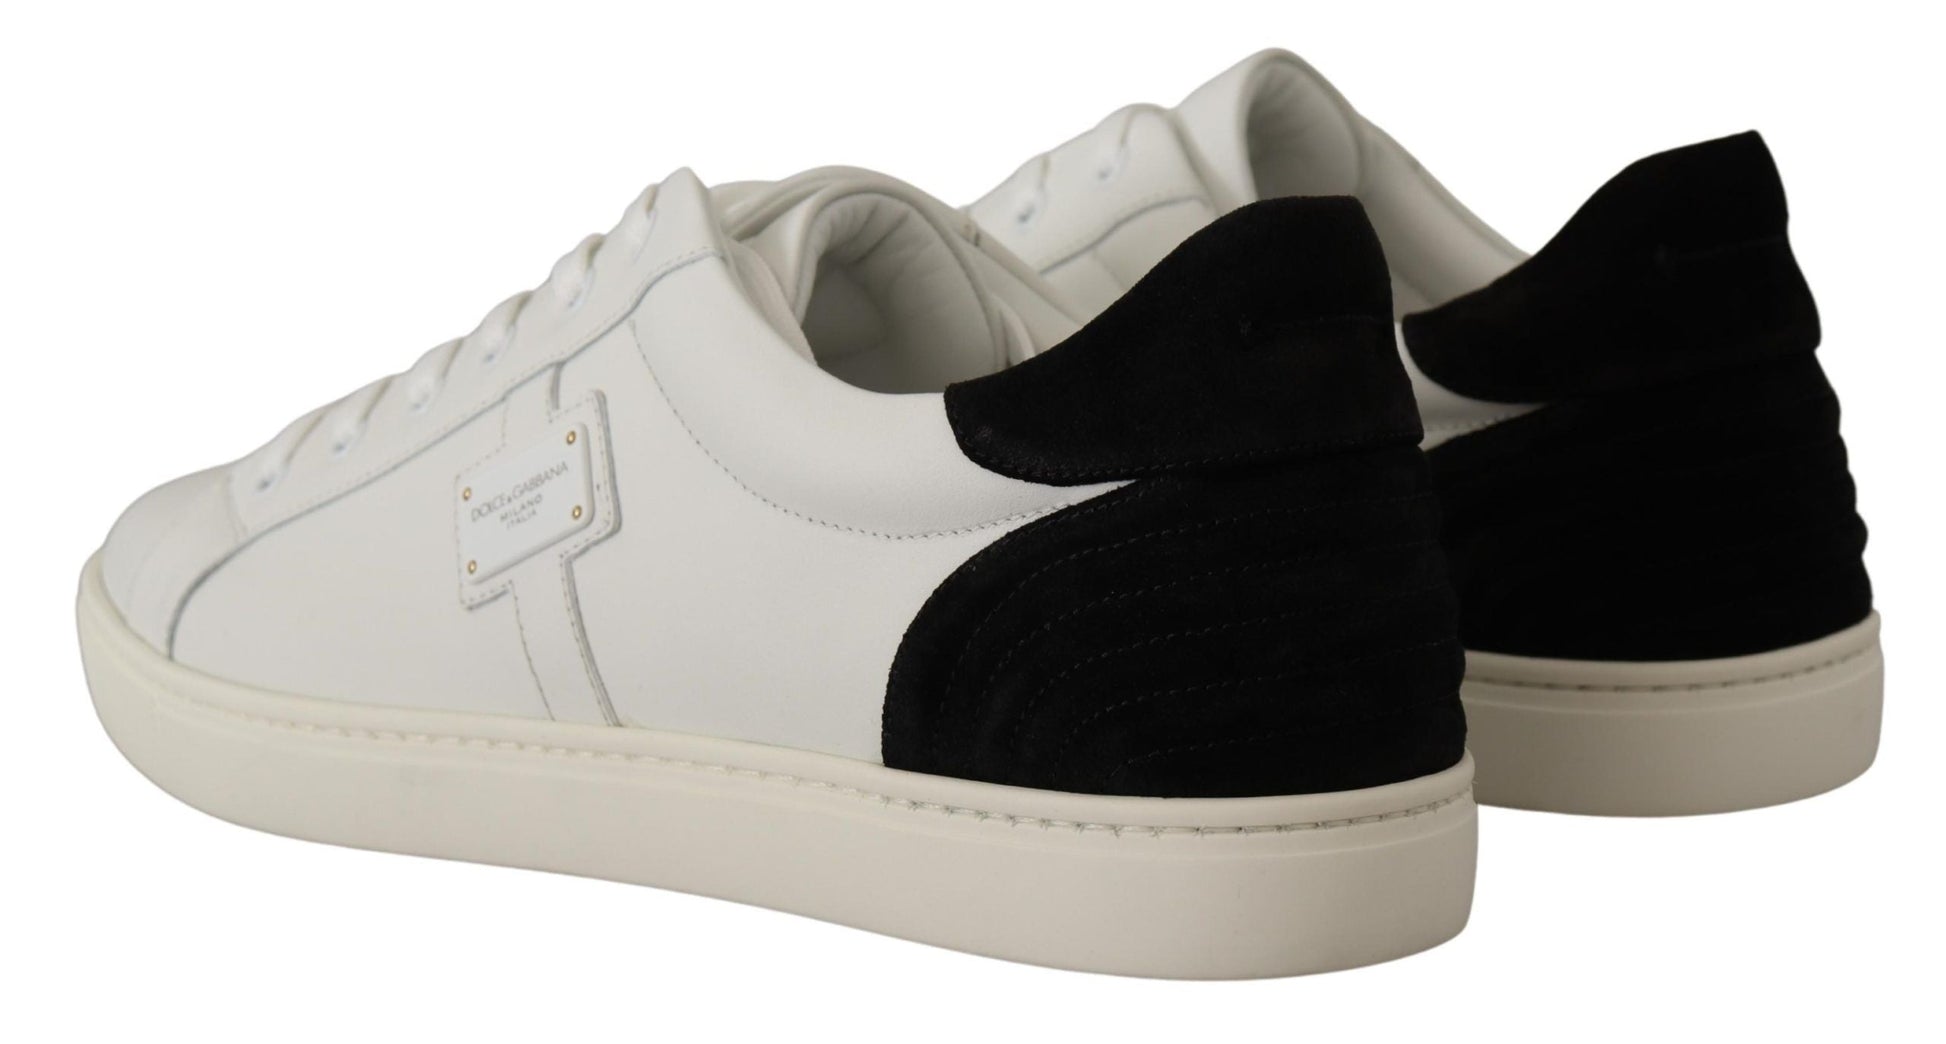 Dolce & Gabbana White Suede Leather Men Sneakers | Fashionsarah.com